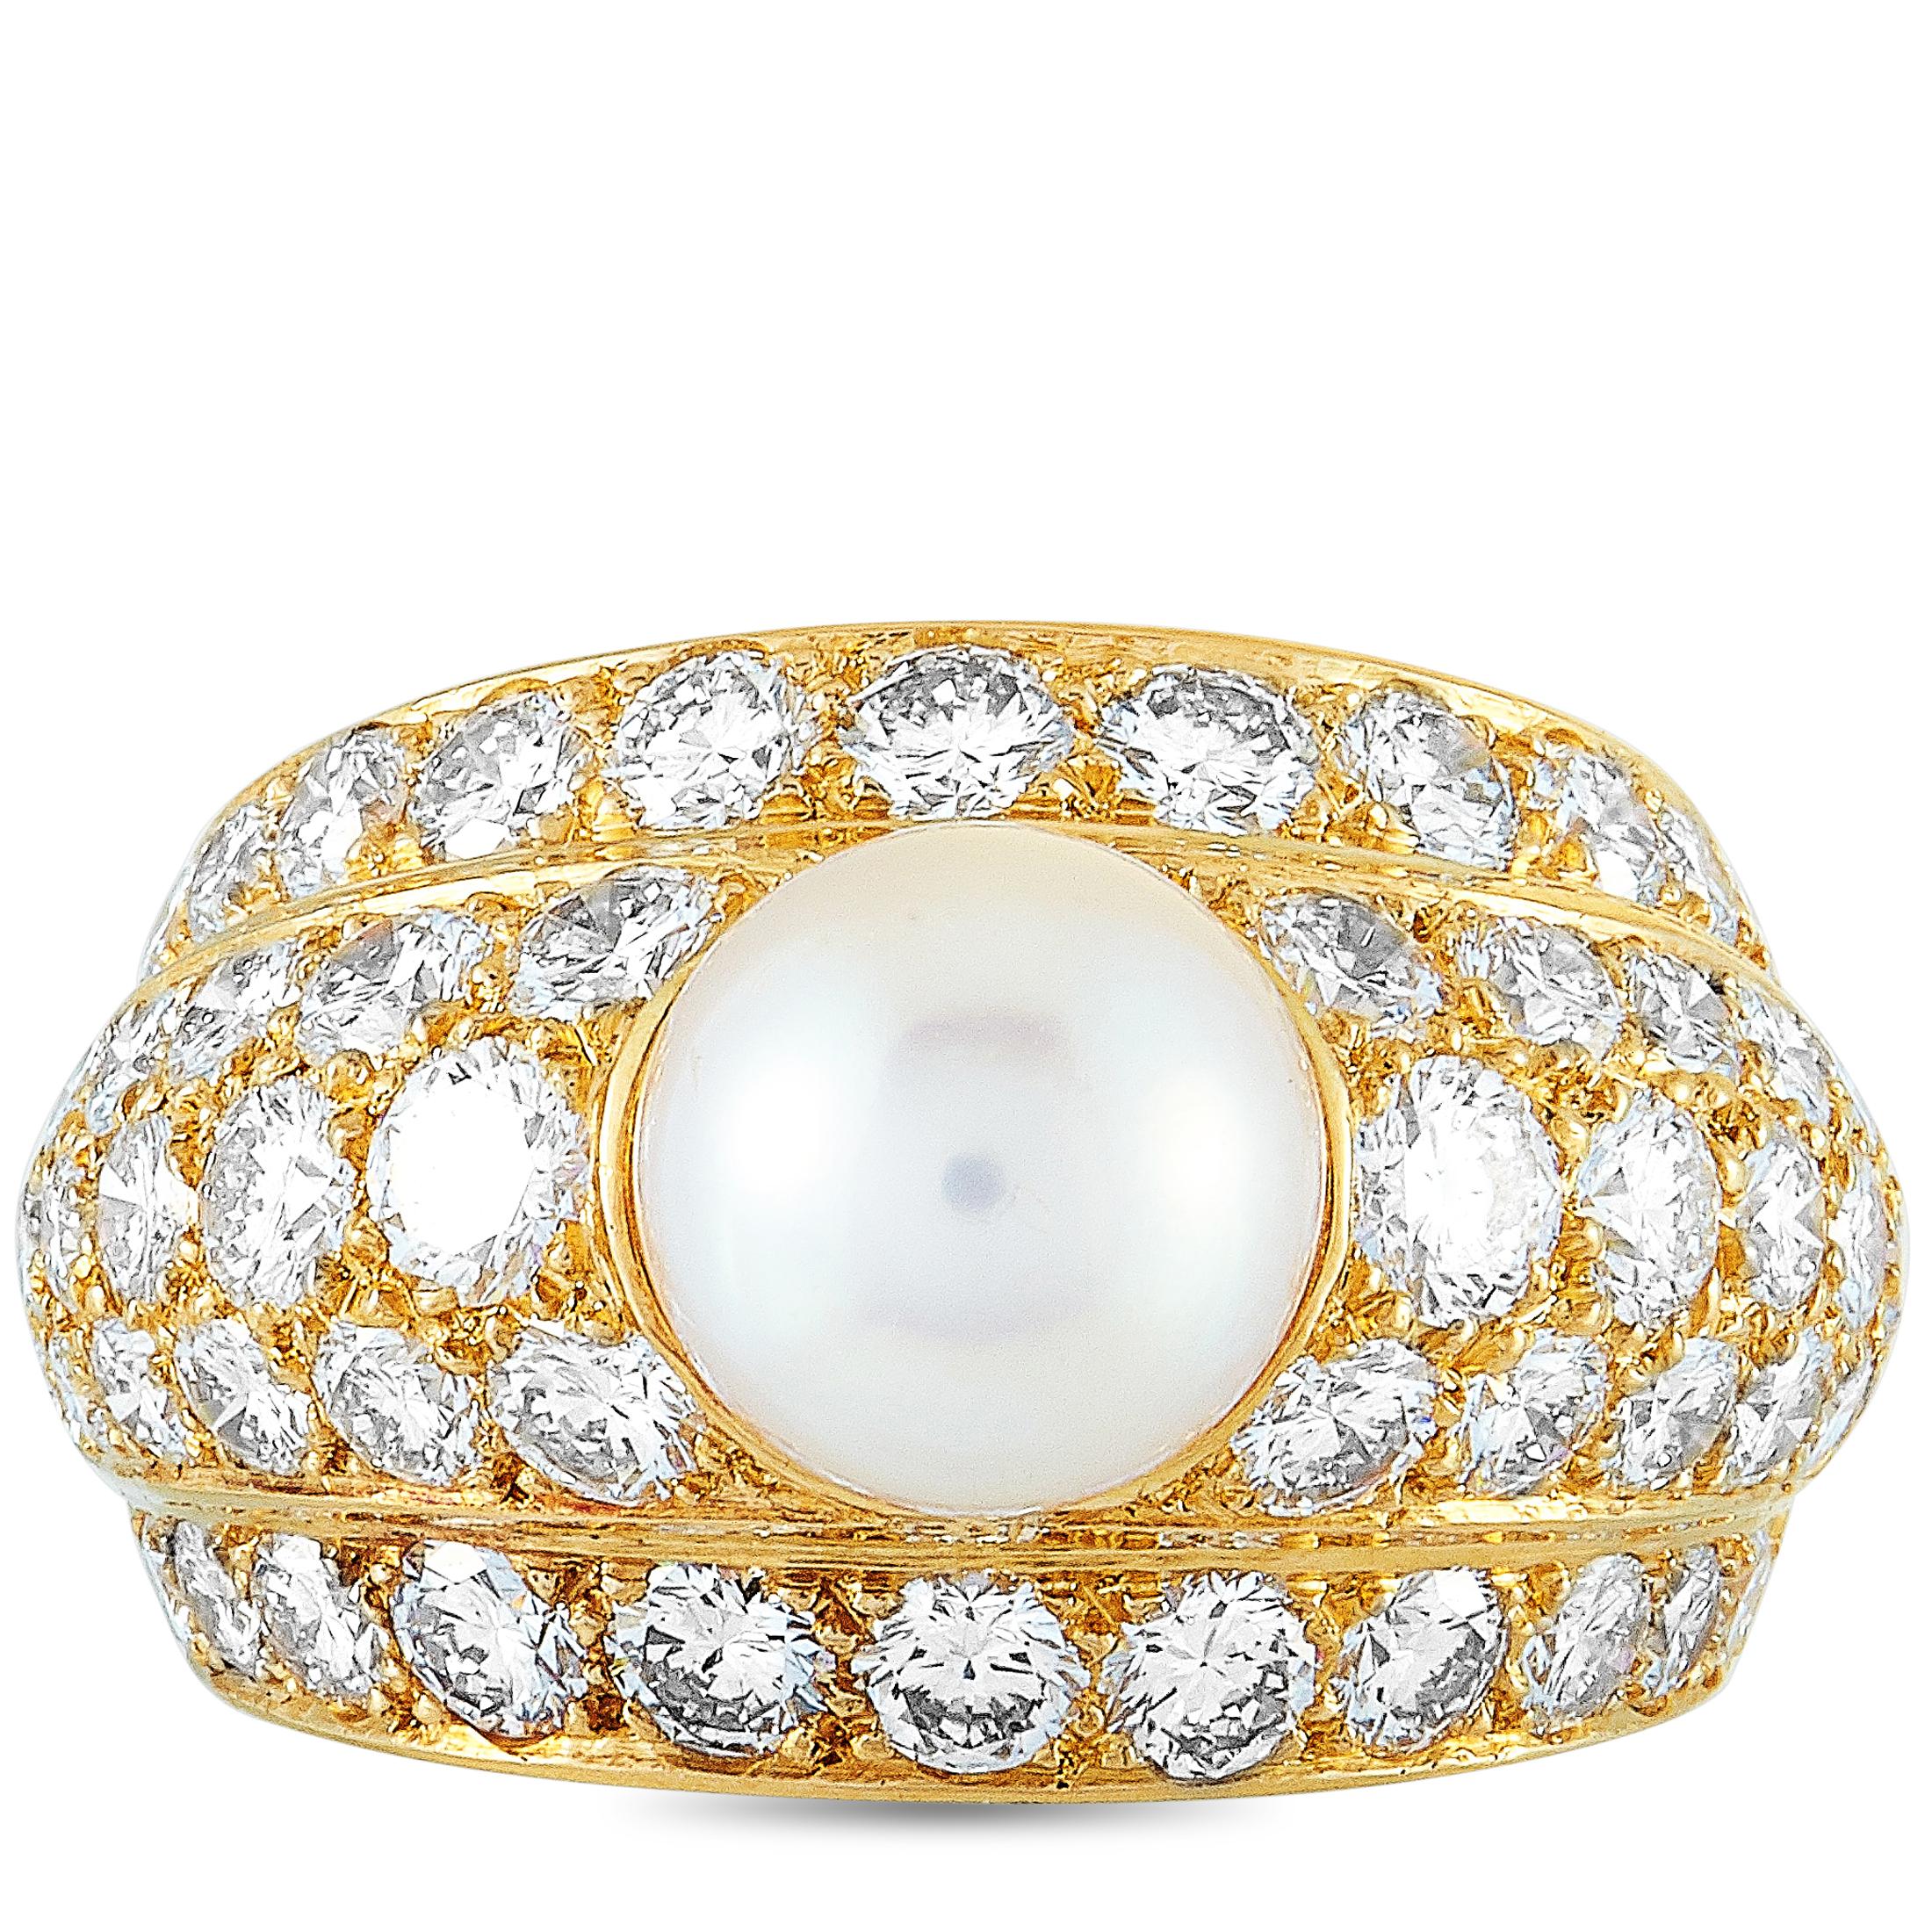 Cartier Nigeria, 2.00 Carat Diamond and Pearl Yellow Gold Ring 2